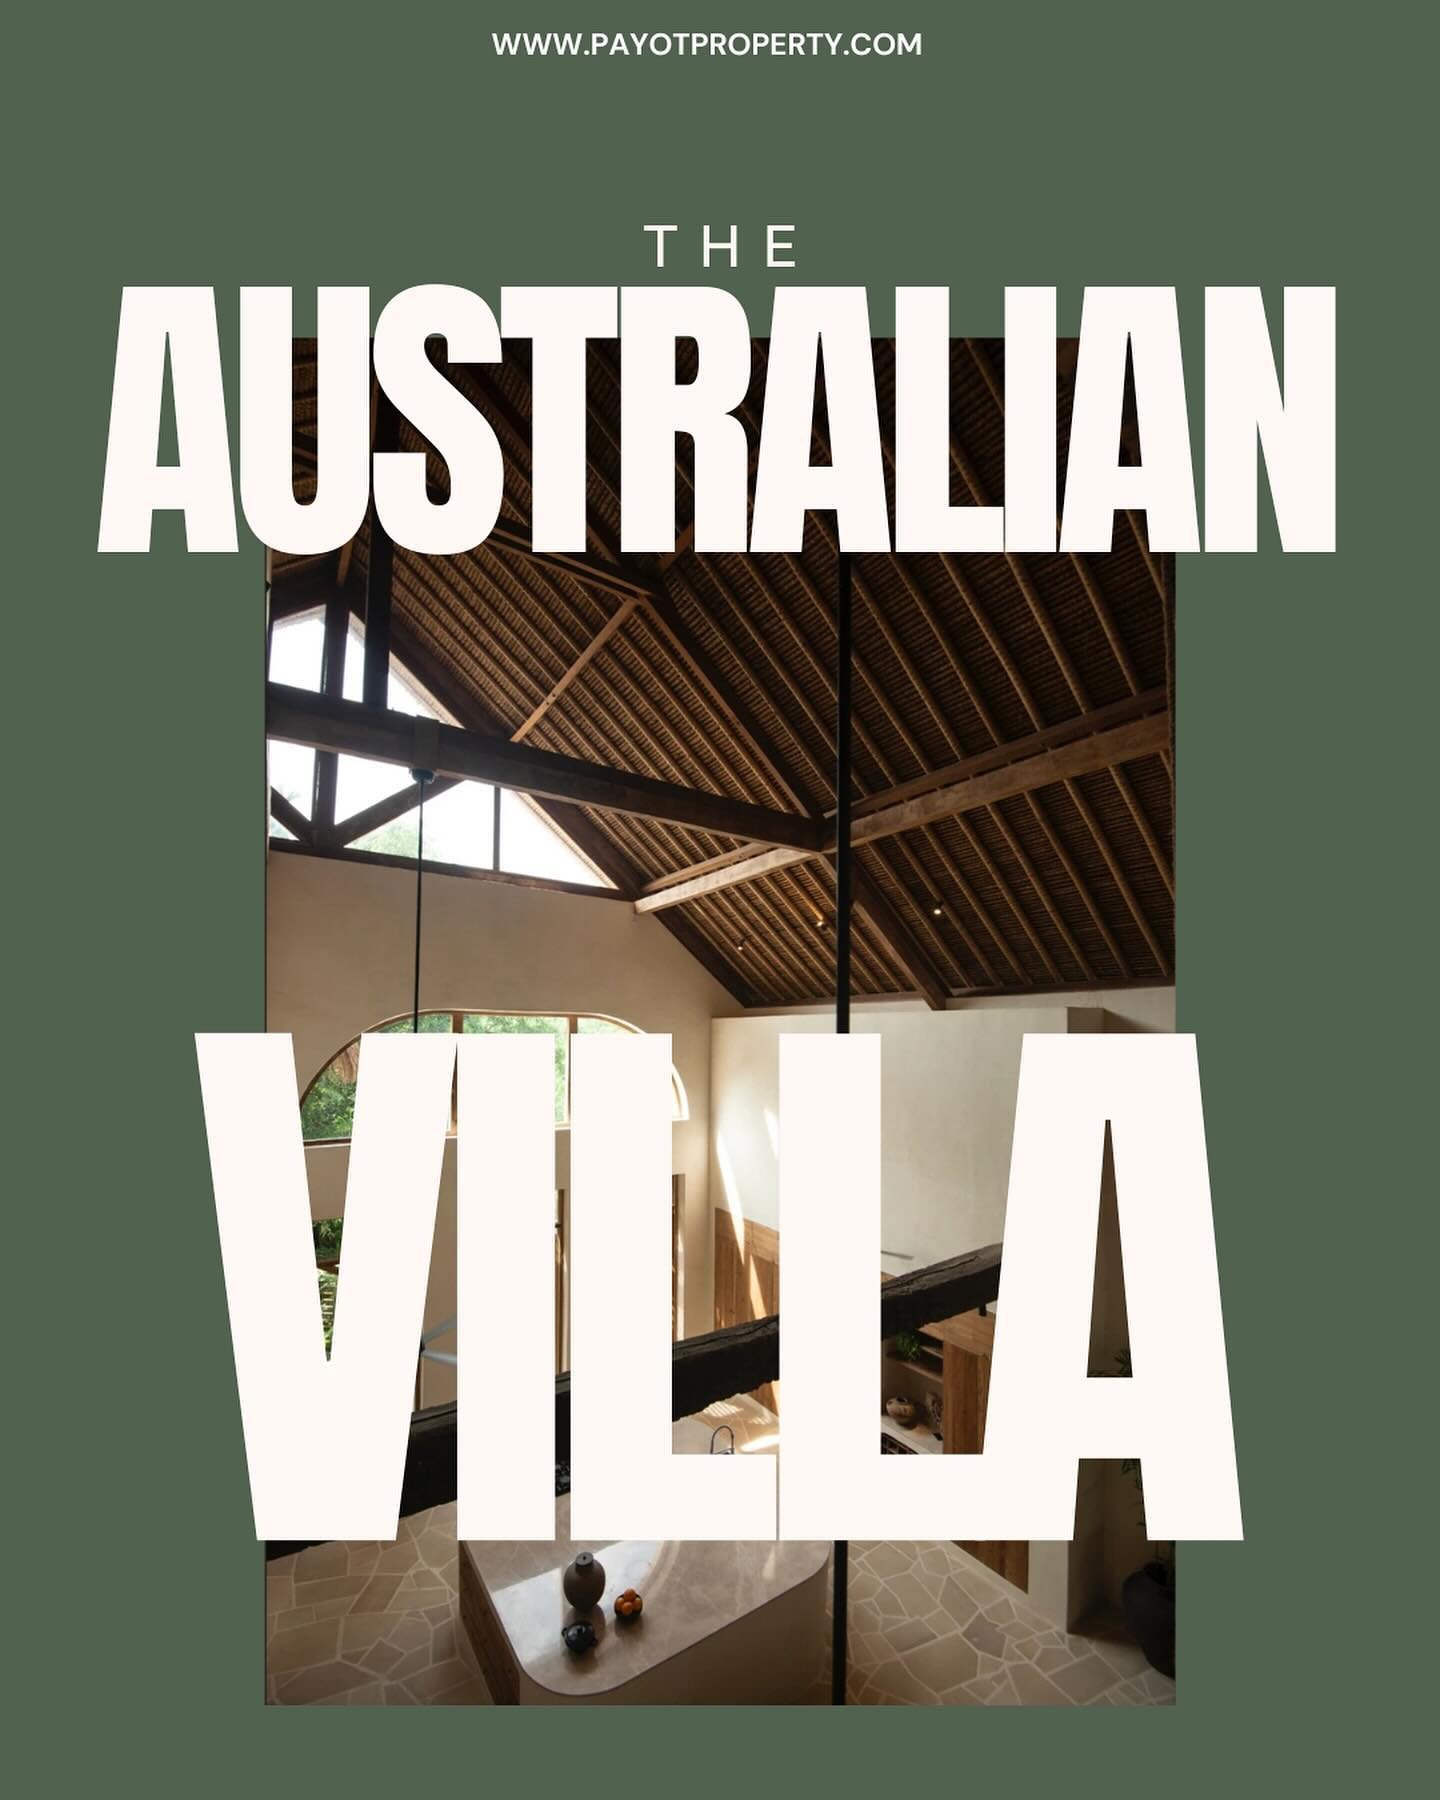 VILLA AUSTRALIAN 

This villa was designed and built by an Australian architecture and construction company. It uses organic and non-toxic materials such as earth, recycled wood, stone and lime, to reduce the carbon footprint and provide thermal mass